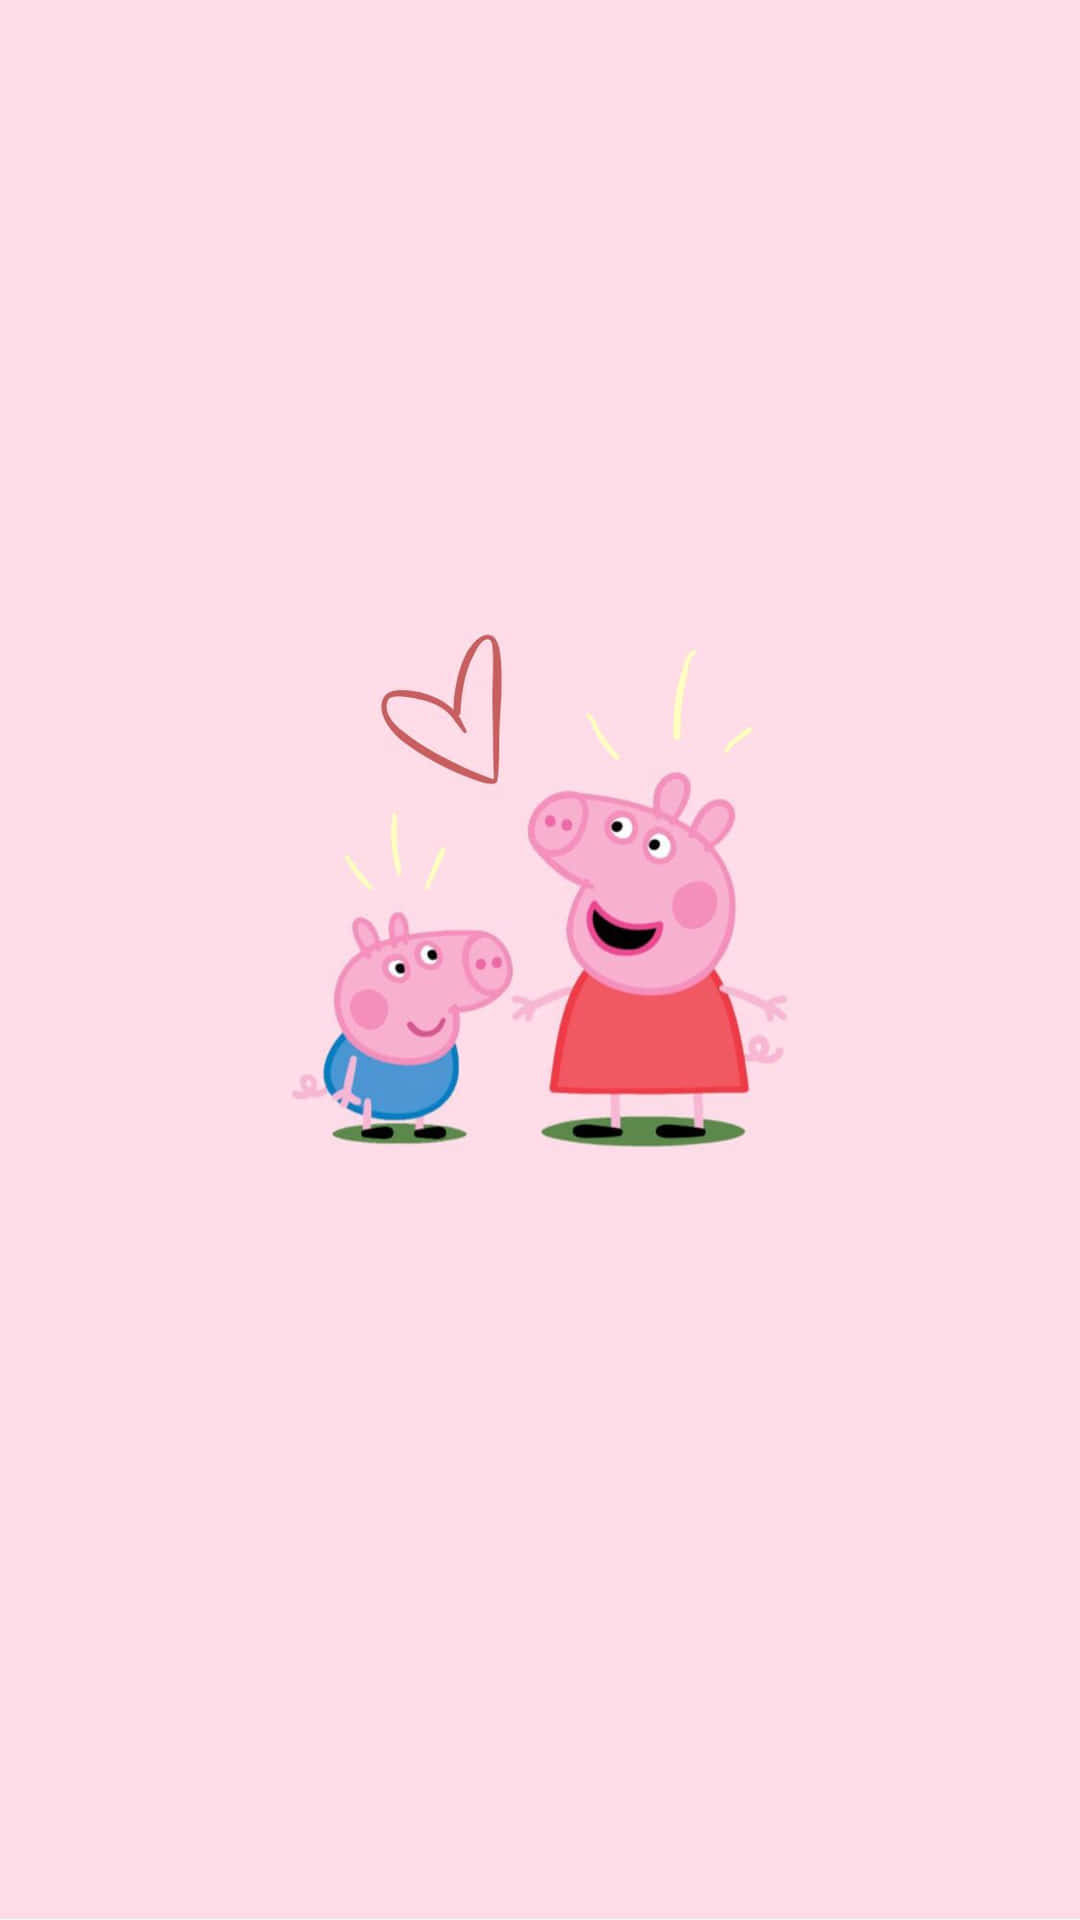 Peppa Pig And Family Enjoying A Lovely Day